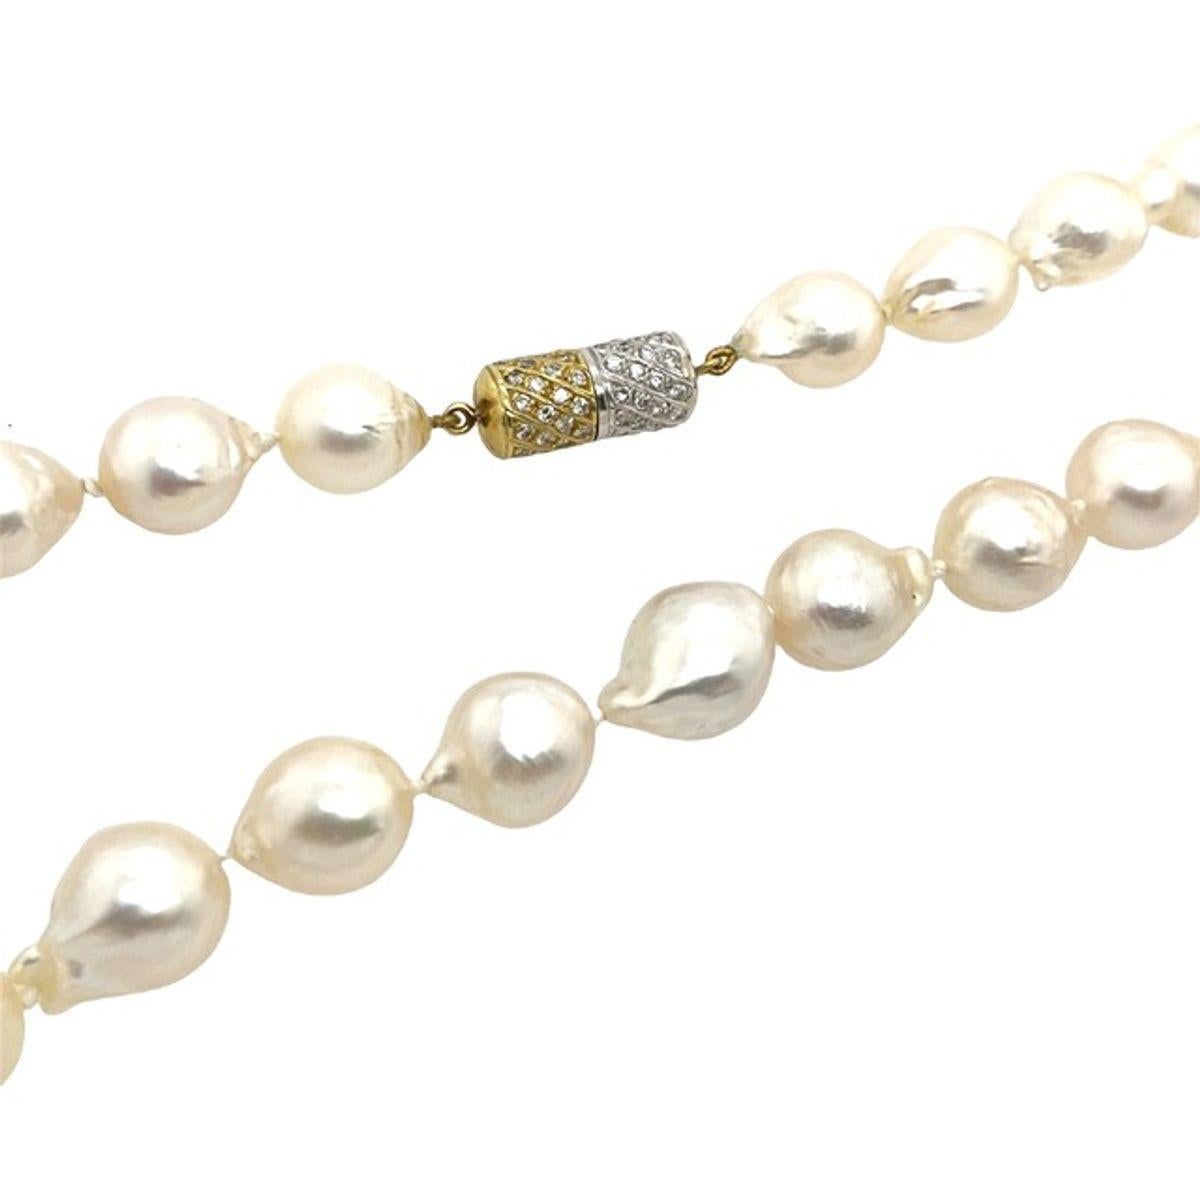 This pearl necklace is a beautiful gift for the loved ones, with top lustre top quality south sea cultured pearls plus with a 18ct Yellow and White Gold Diamond clasp set with 1.0ct of Round Brilliant Cut Diamonds. This sophisticated and classic